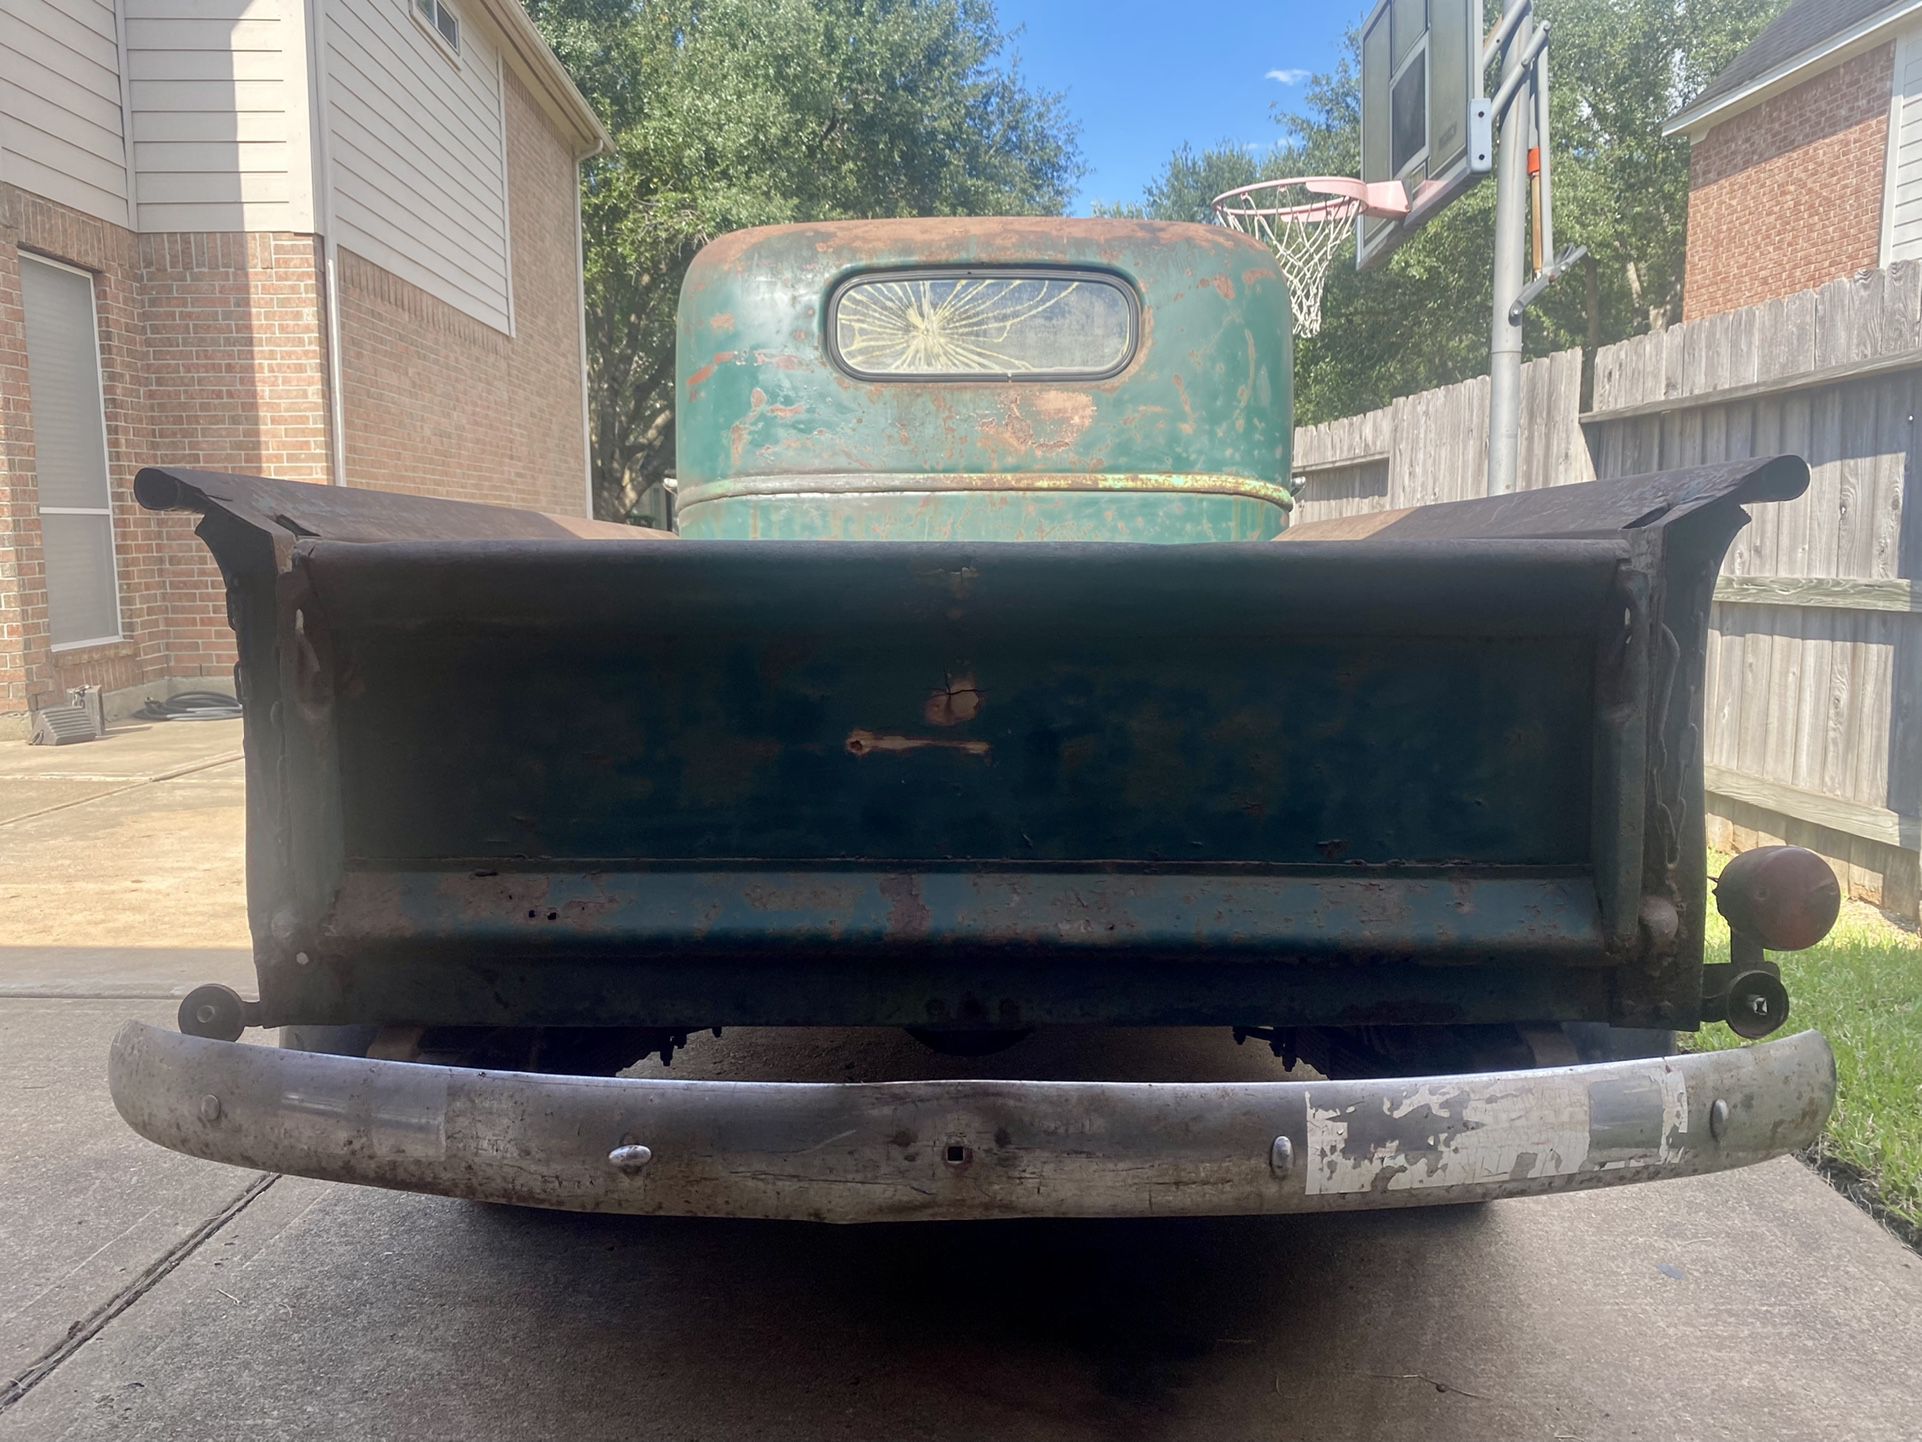 1946 Chevy Truck Barn Find With Texas Title